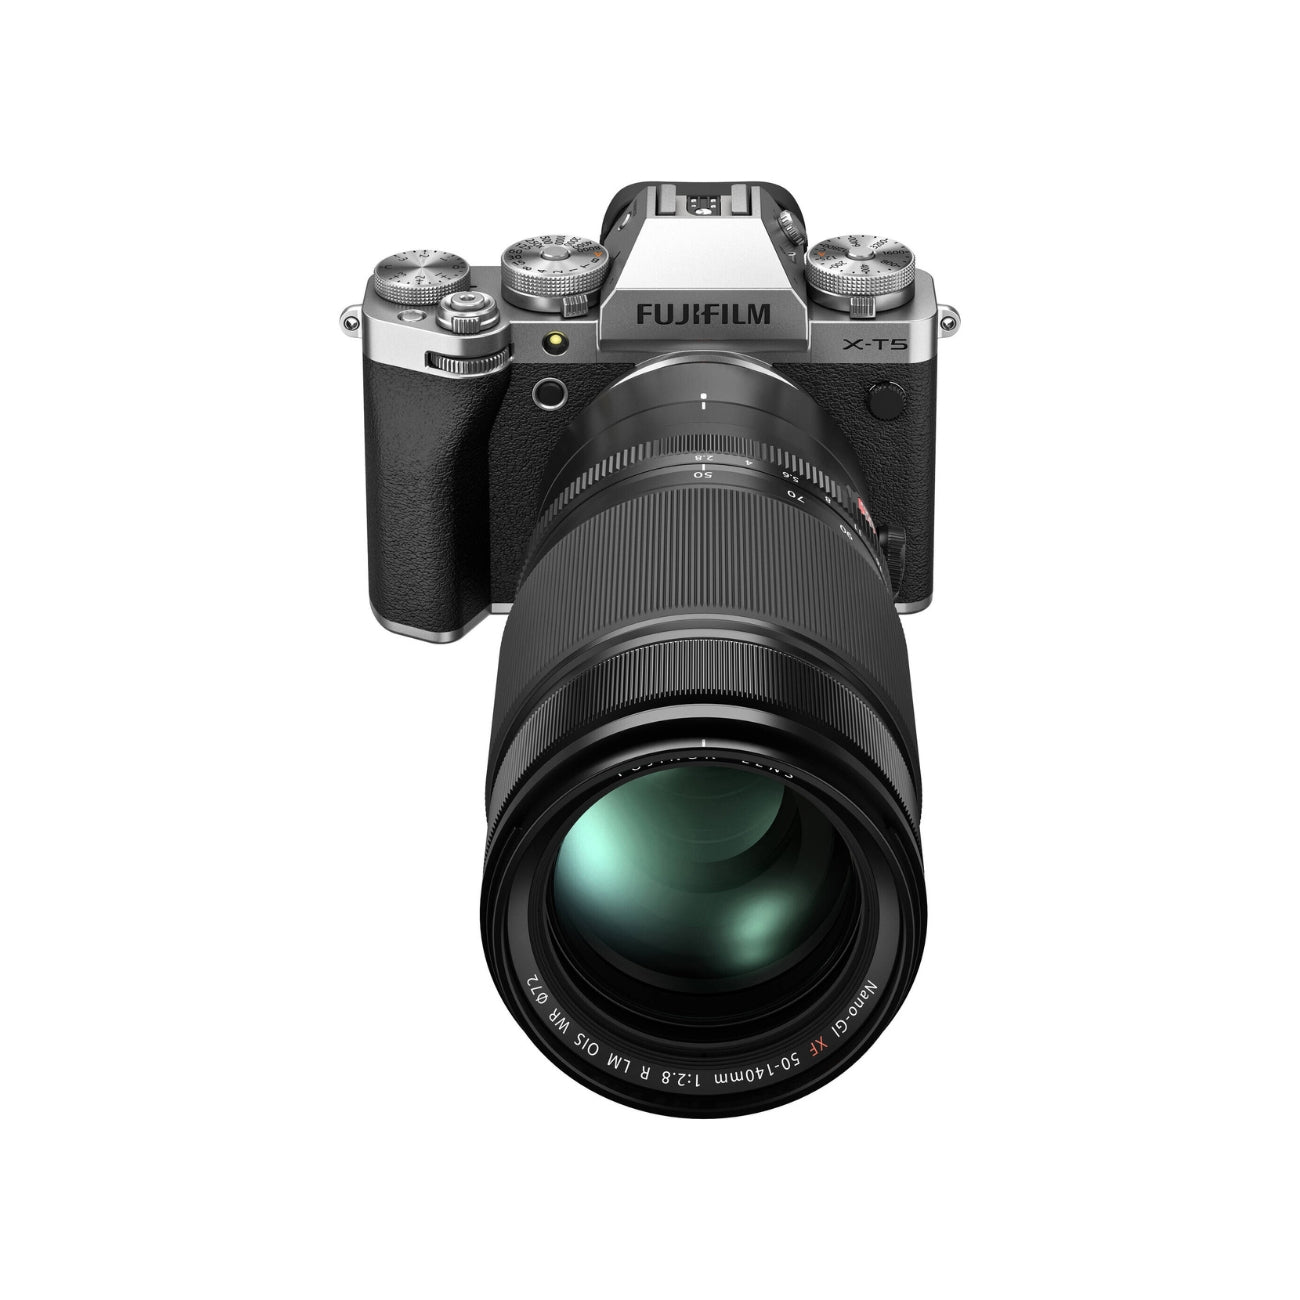 Fujifilm X-T5 Mirrorless Camera (Silver) with the Lens